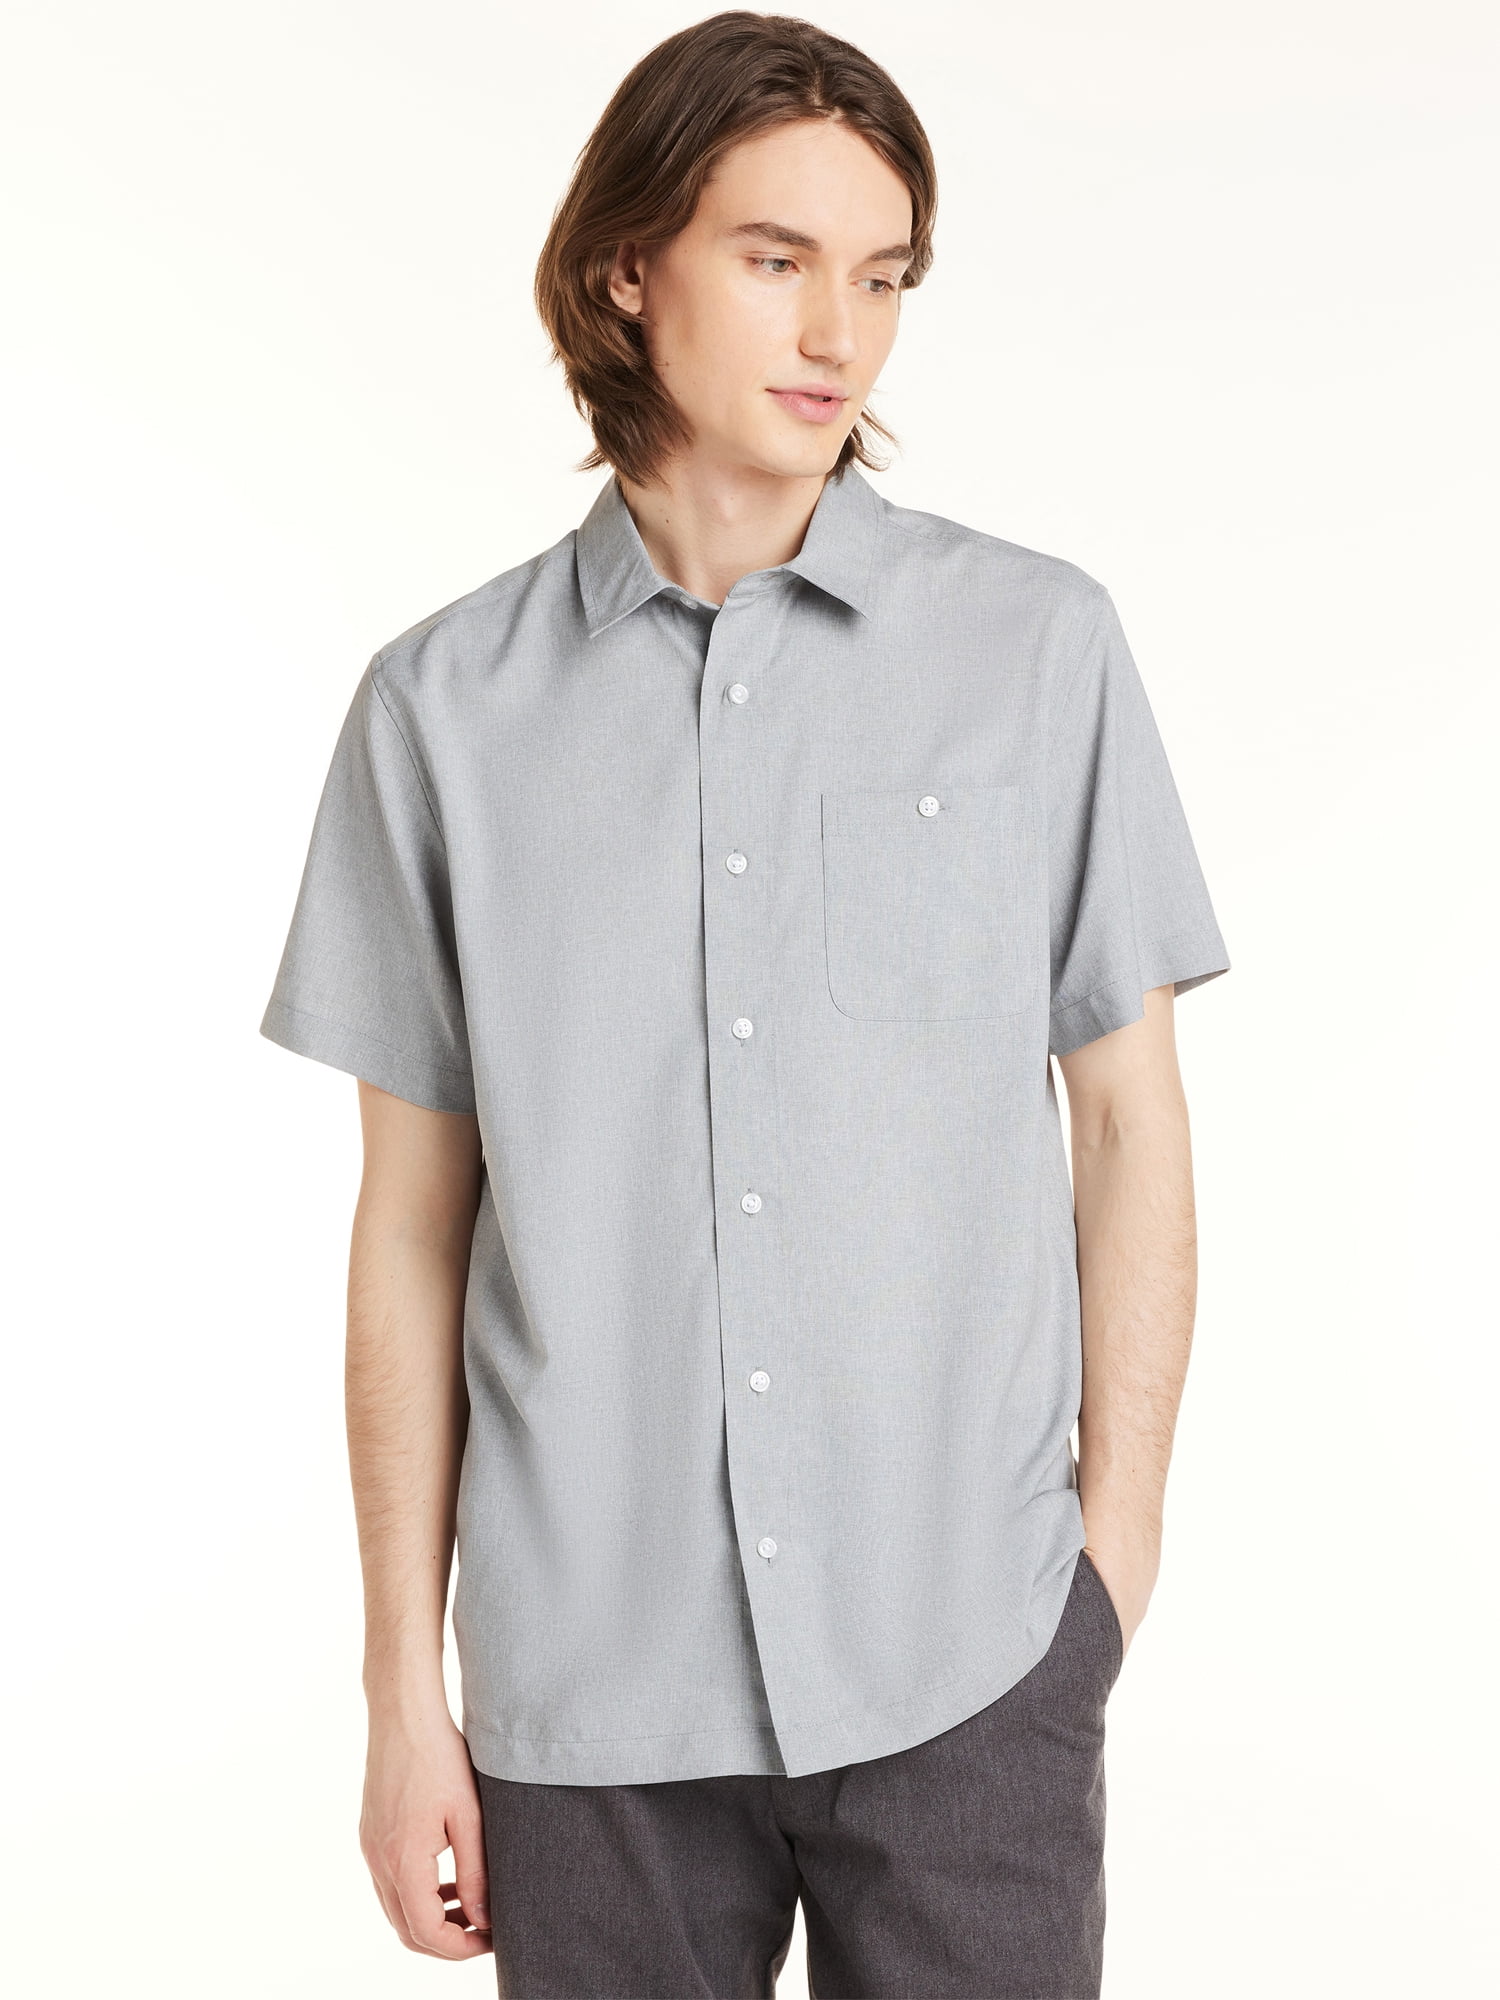 George Men's & Big Men's Lightwieght Button-Up Shirt with Short Sleeves, Sizes S-3xl, Size: Medium, Gray